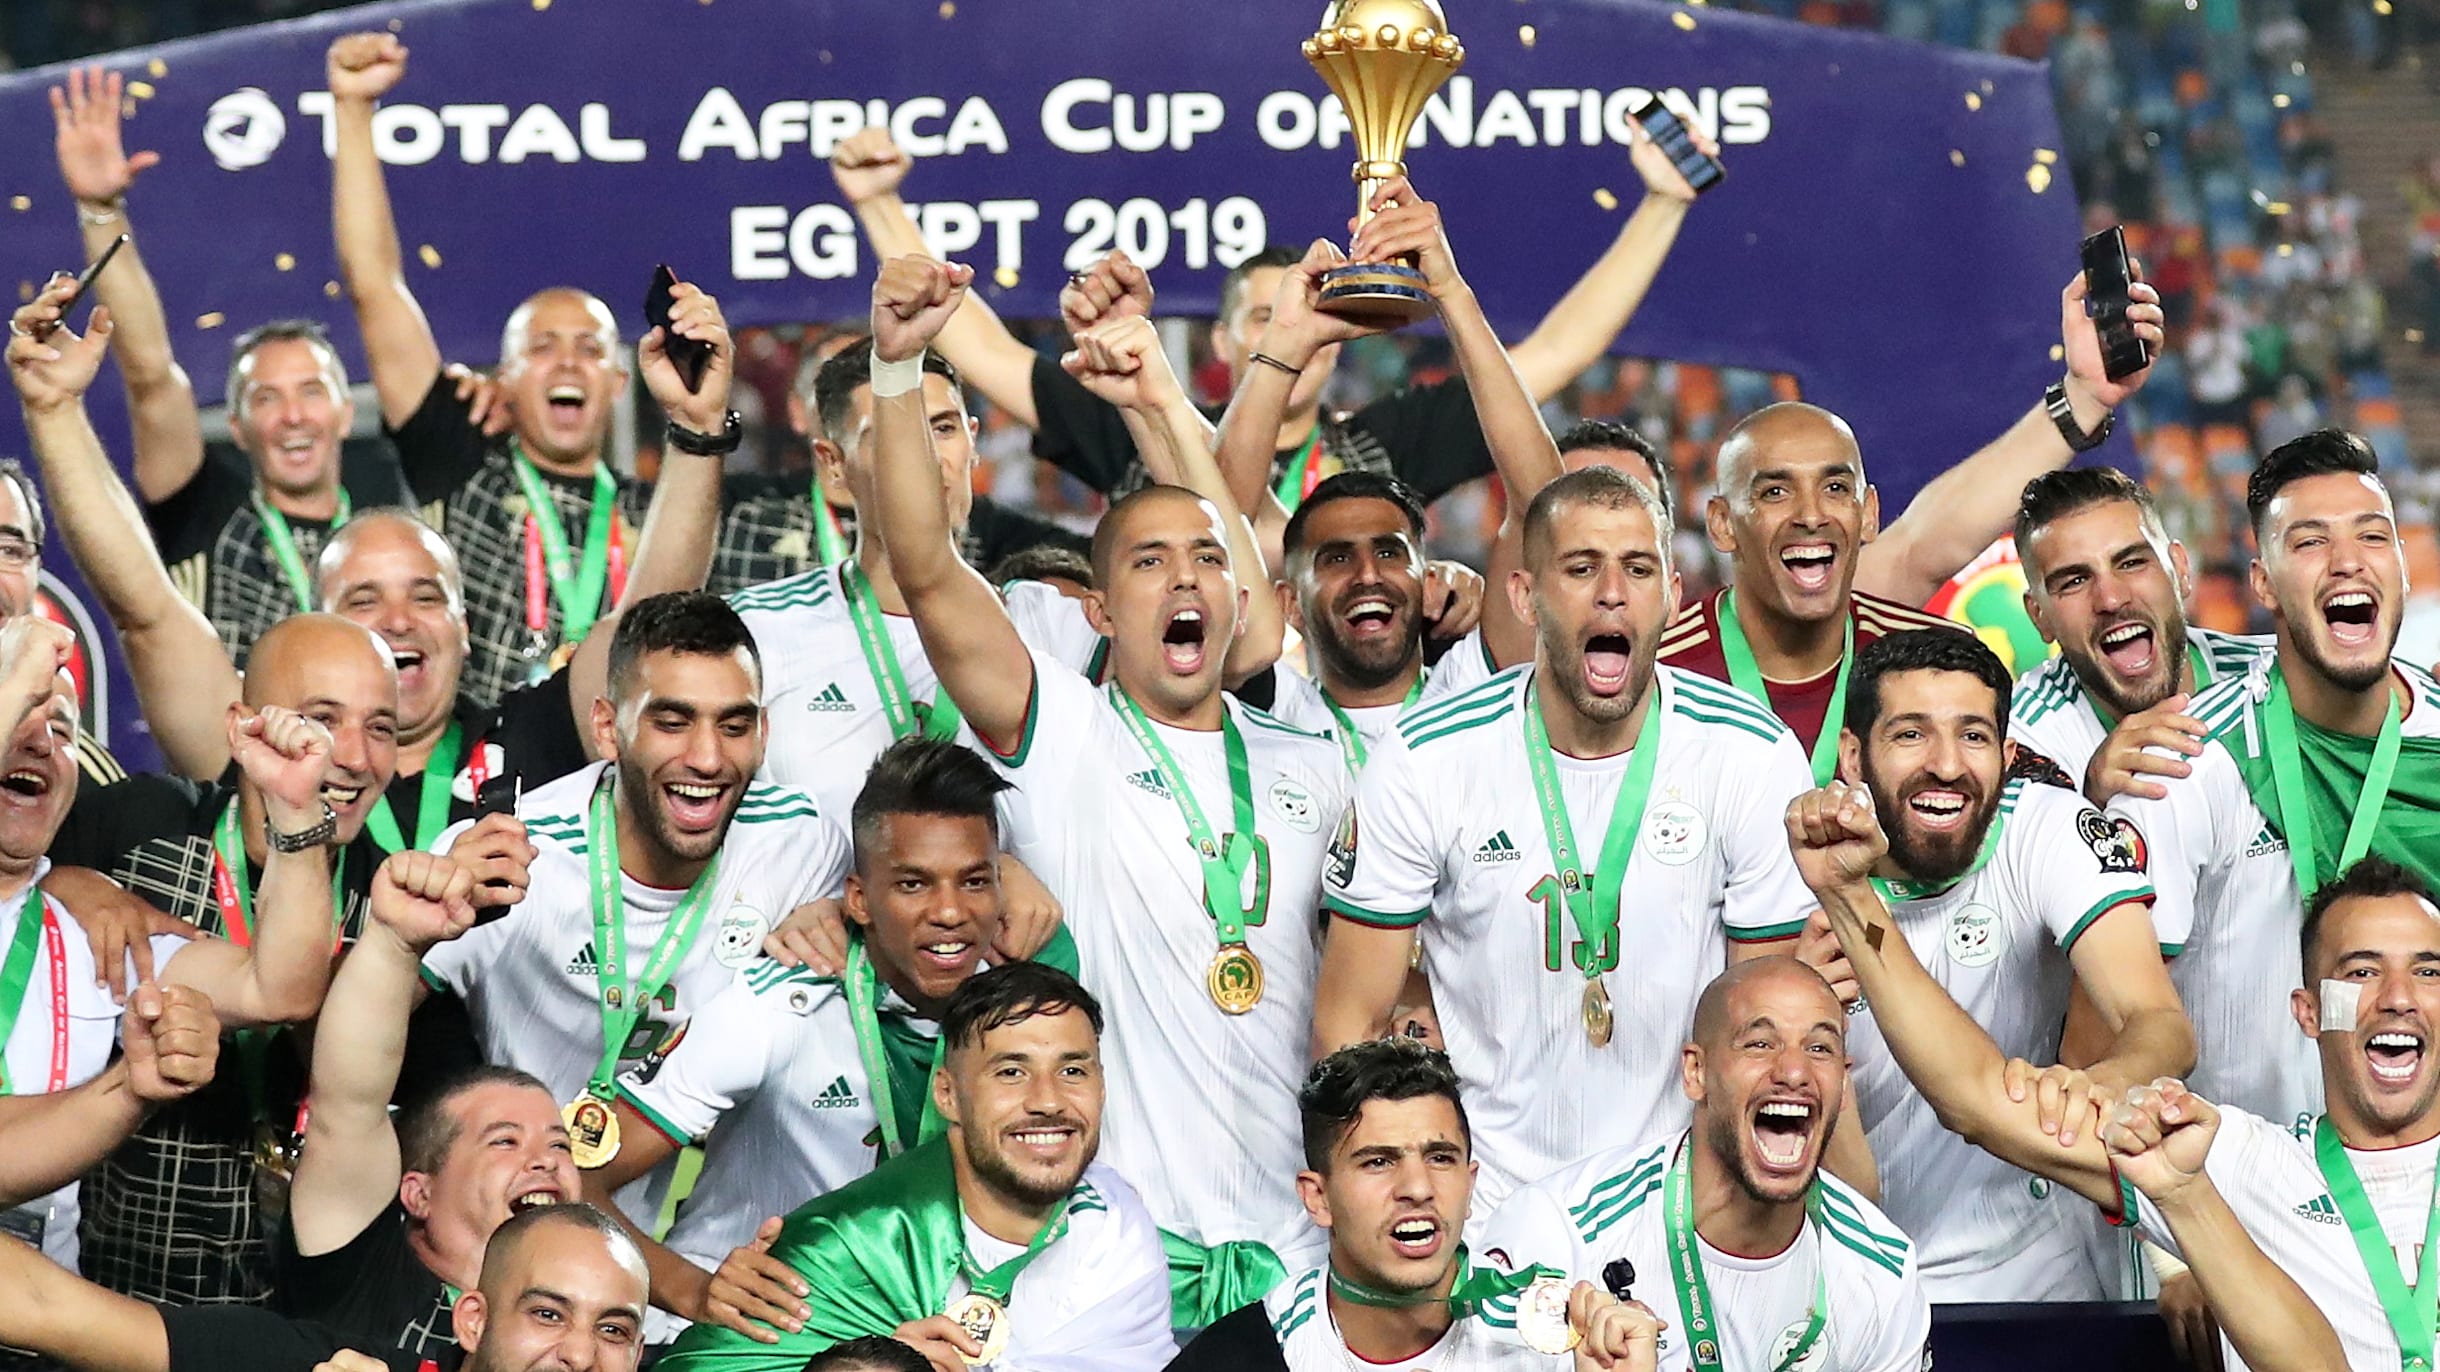 Africa Cup of Nations 2021 Preview, stars to watch, schedule and more